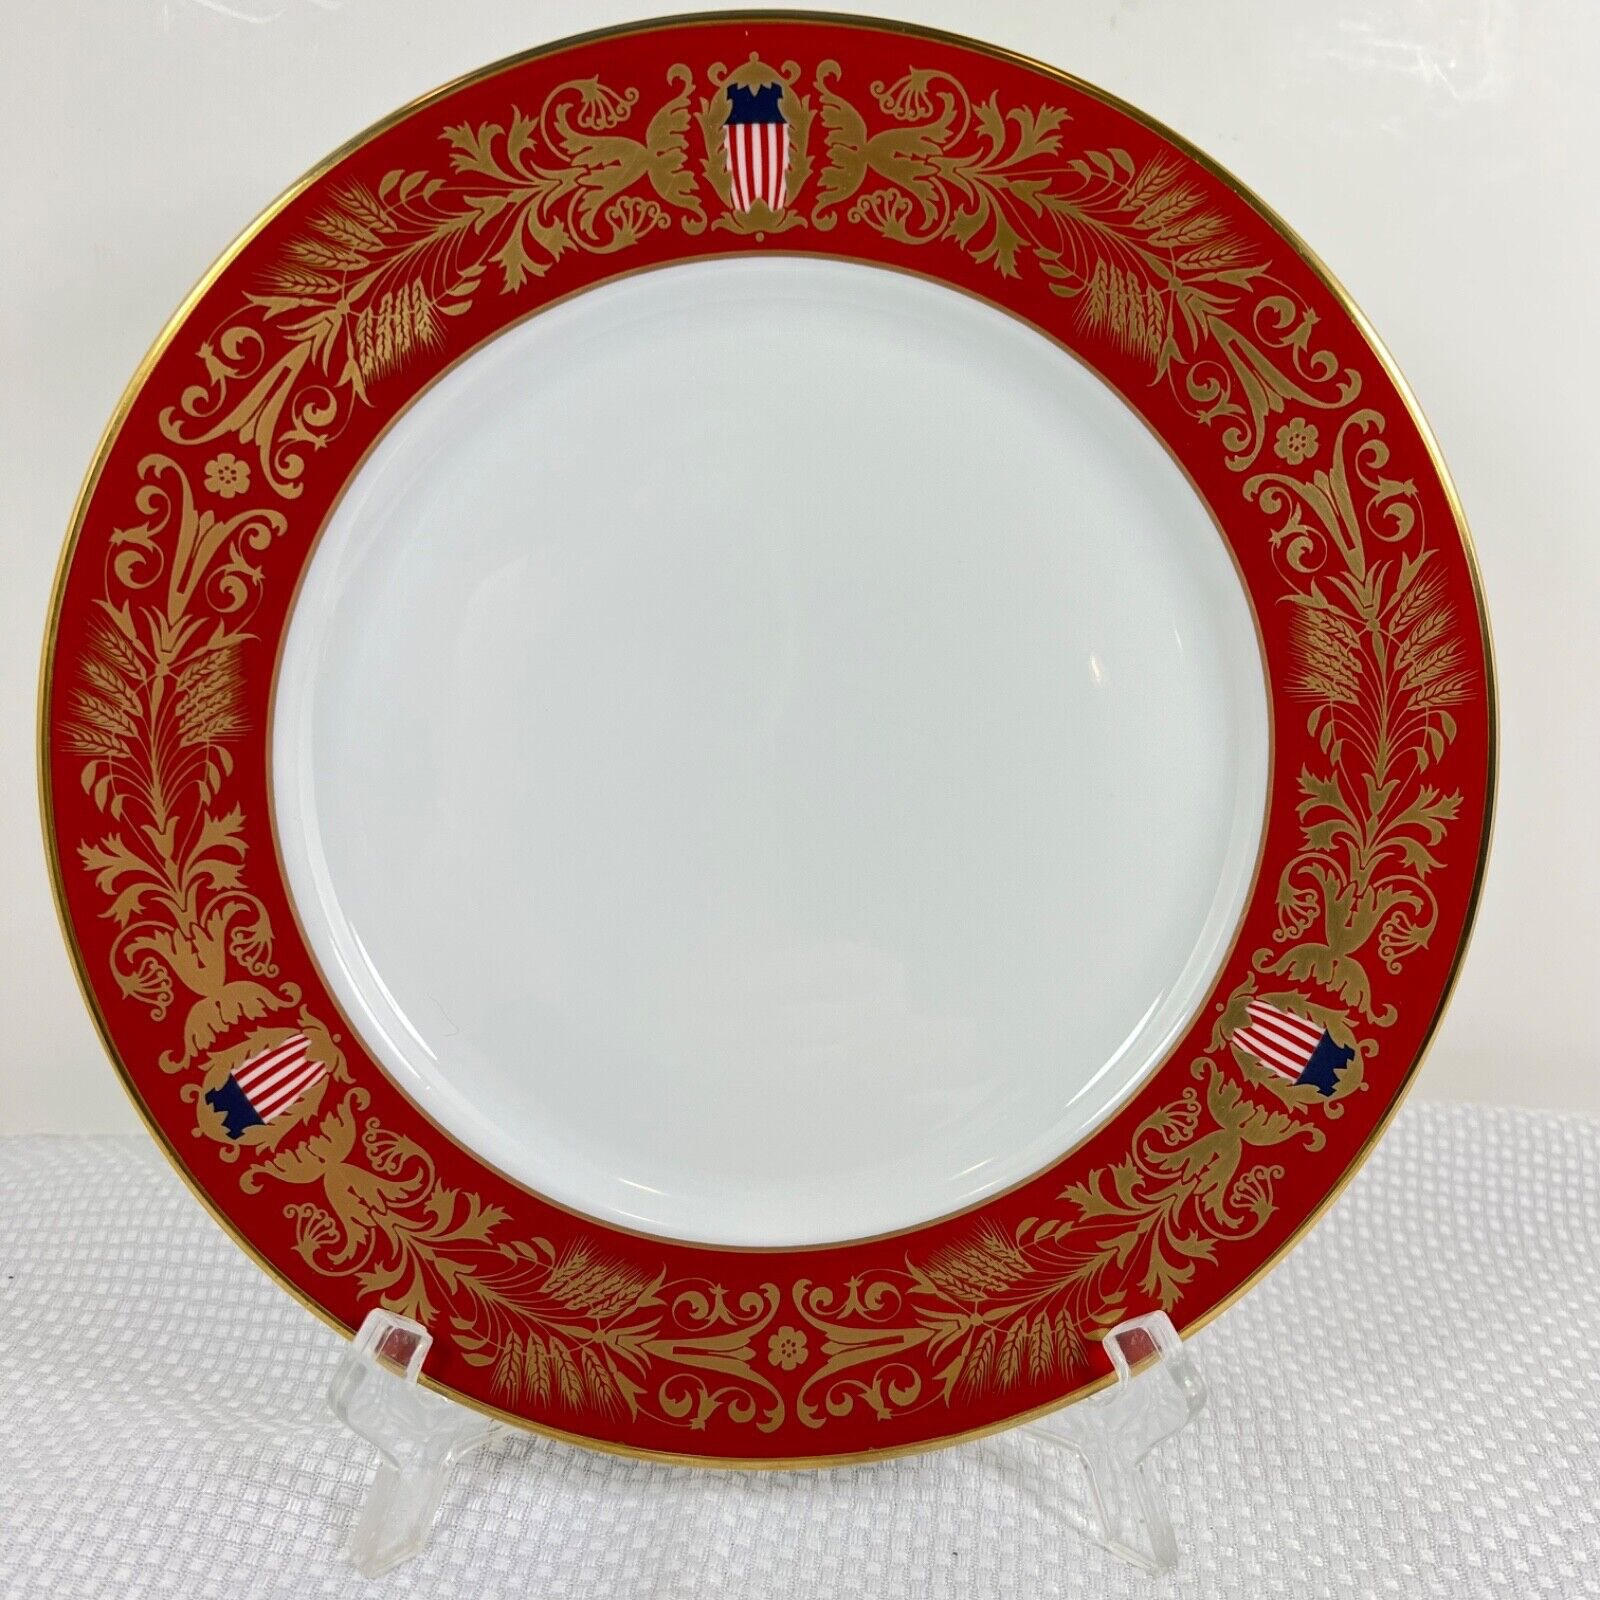 Tiffany and Co. 1999 United States Congressional Plate Millennium Series